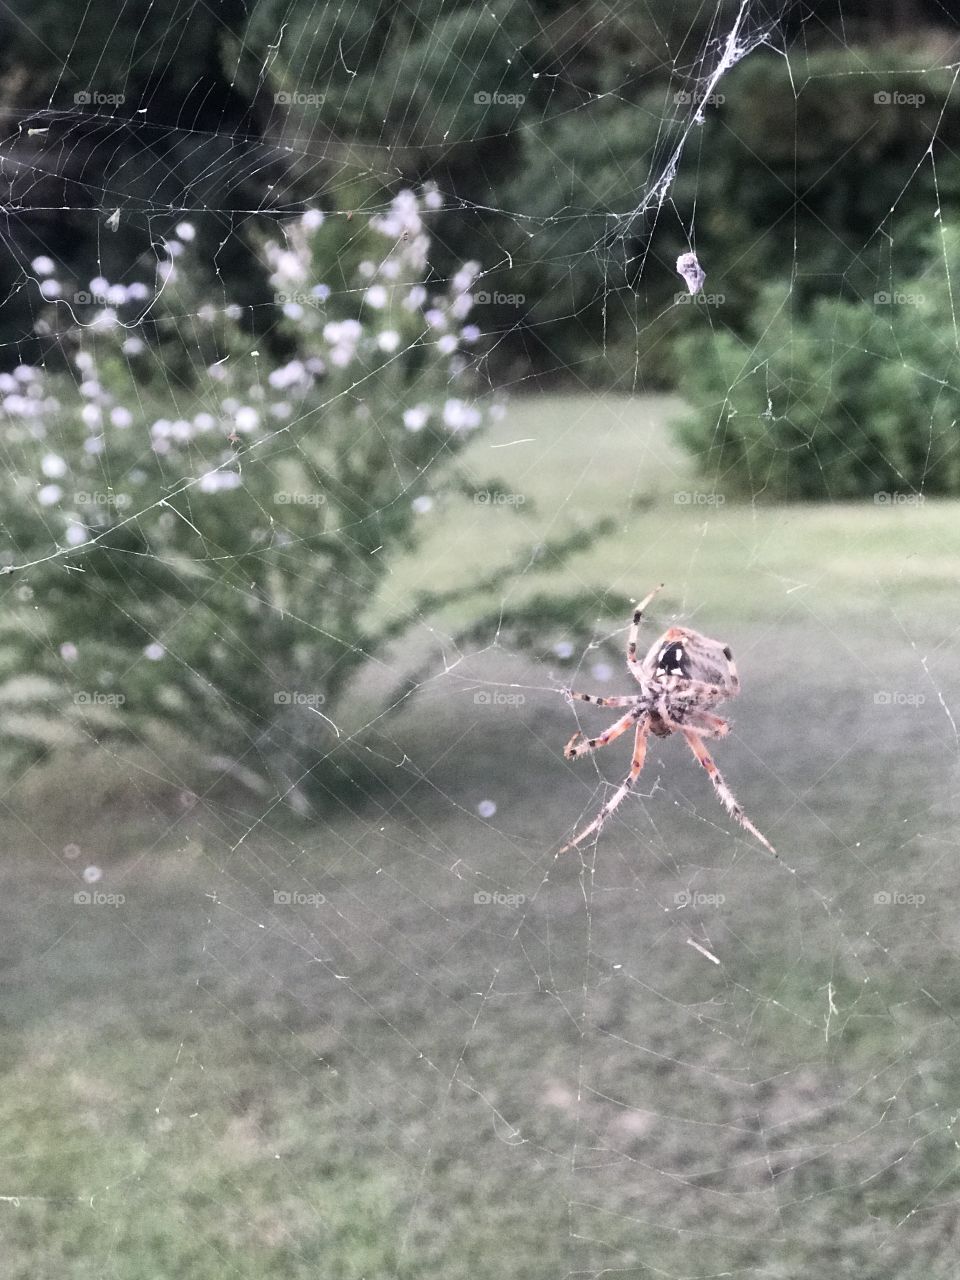 Local resident spider.